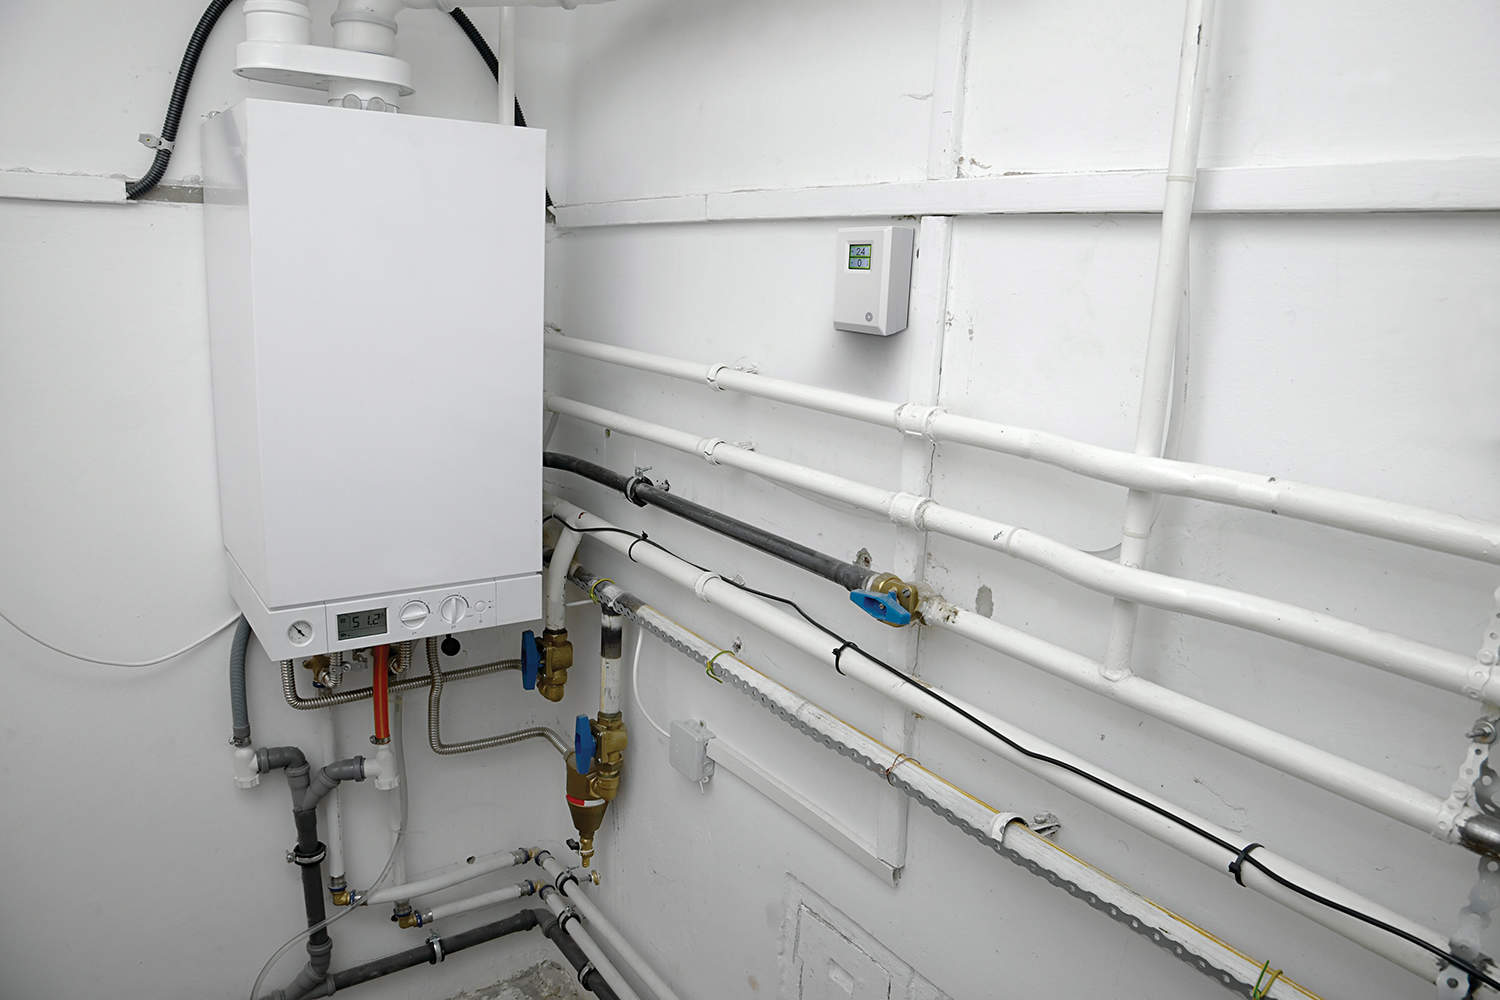 Protecting Lives: The Importance of Carbon Monoxide Detection in Boiler Rooms